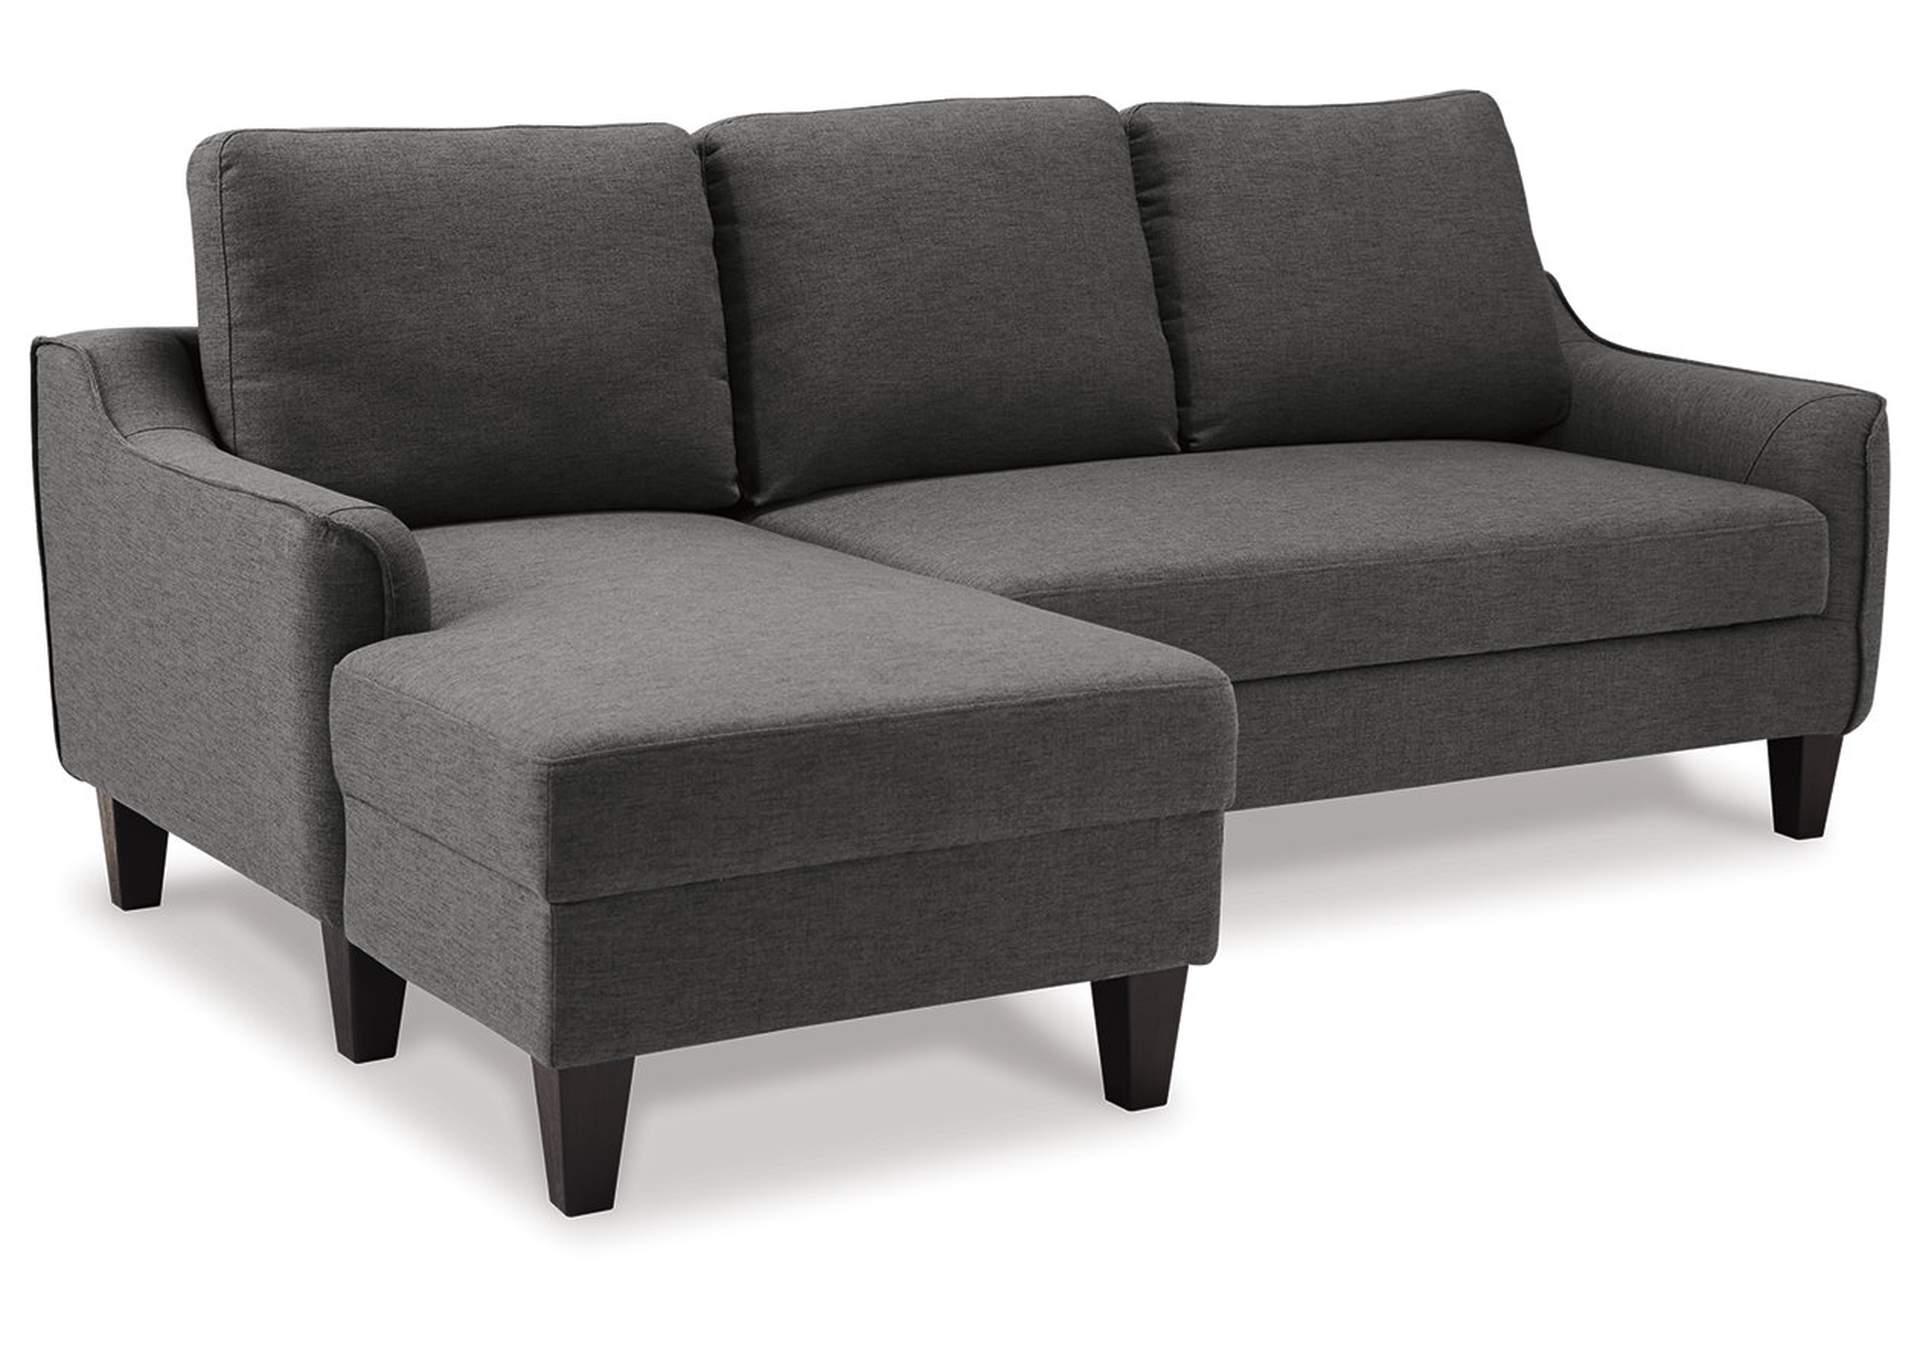 Jarreau Sofa Chaise Sleeper and 2 Chairs,Signature Design By Ashley